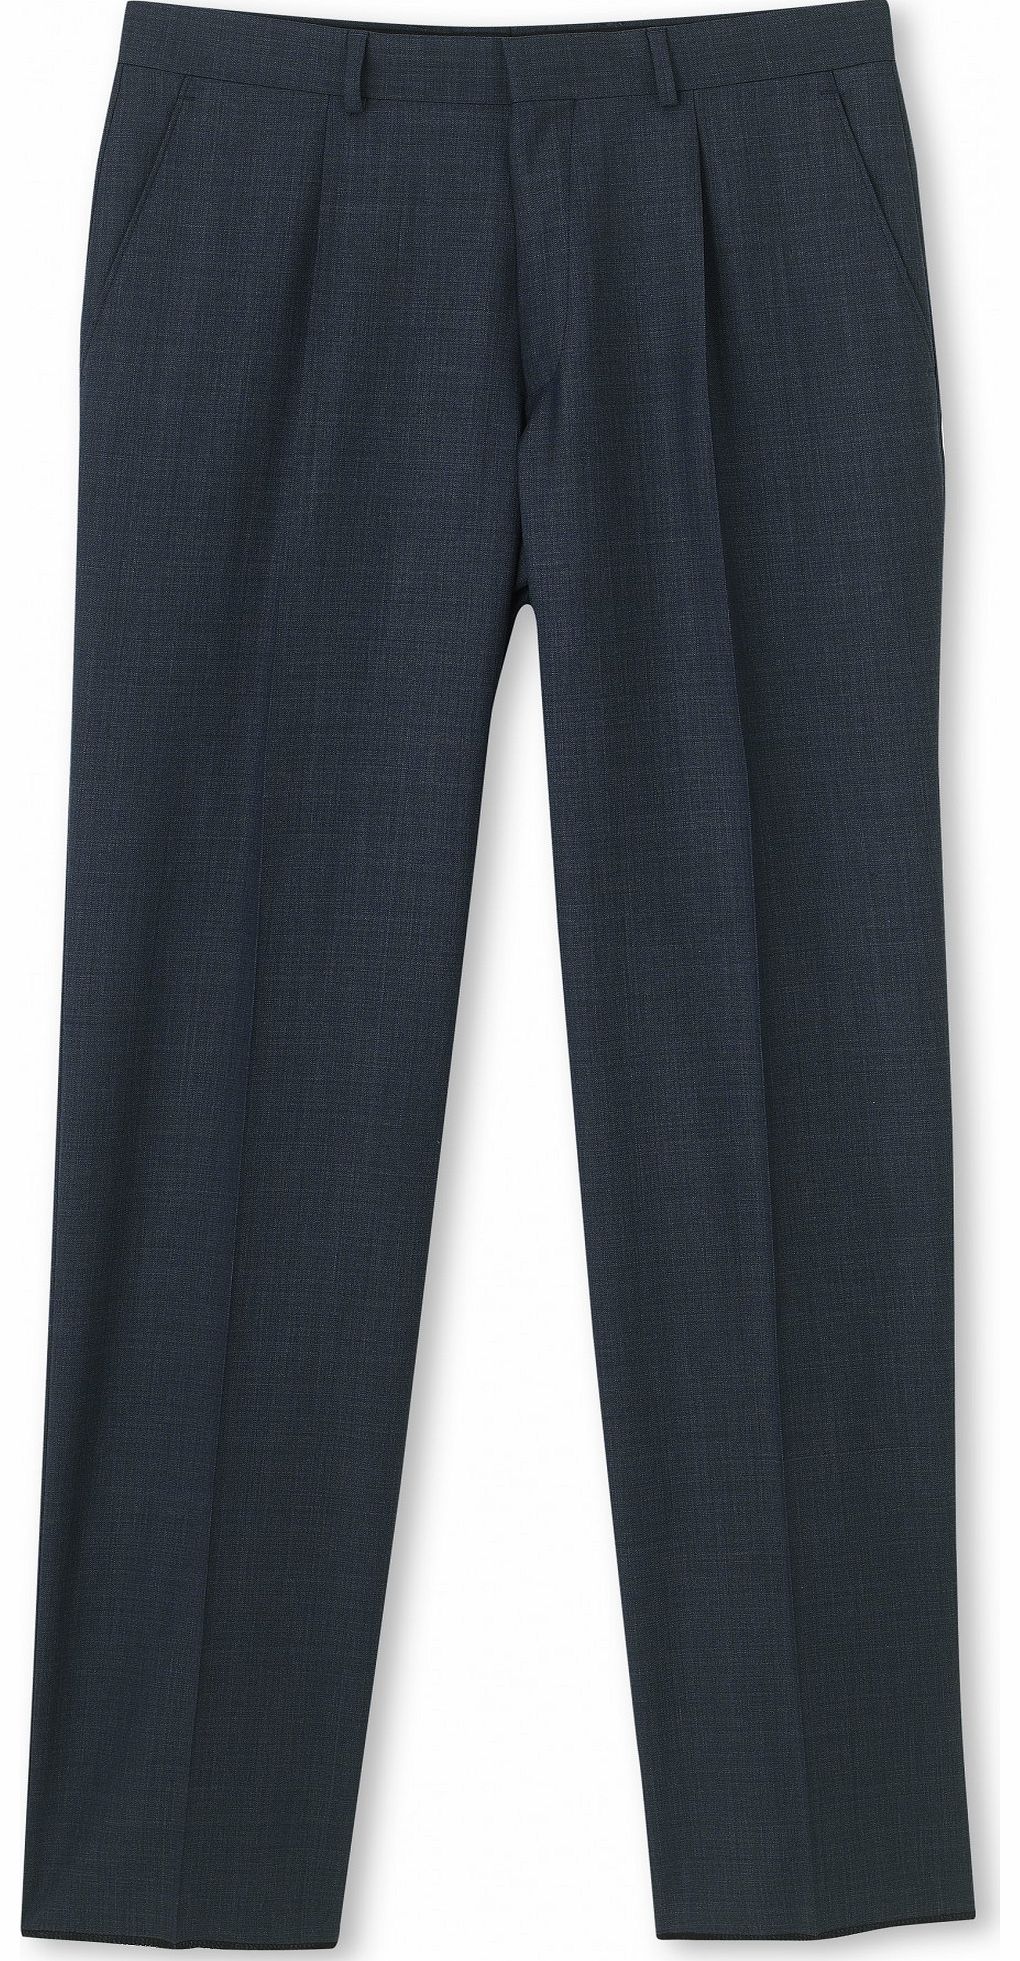 Savile Row Company Navy Microdot Classic Fit Trouser 30`` 30`